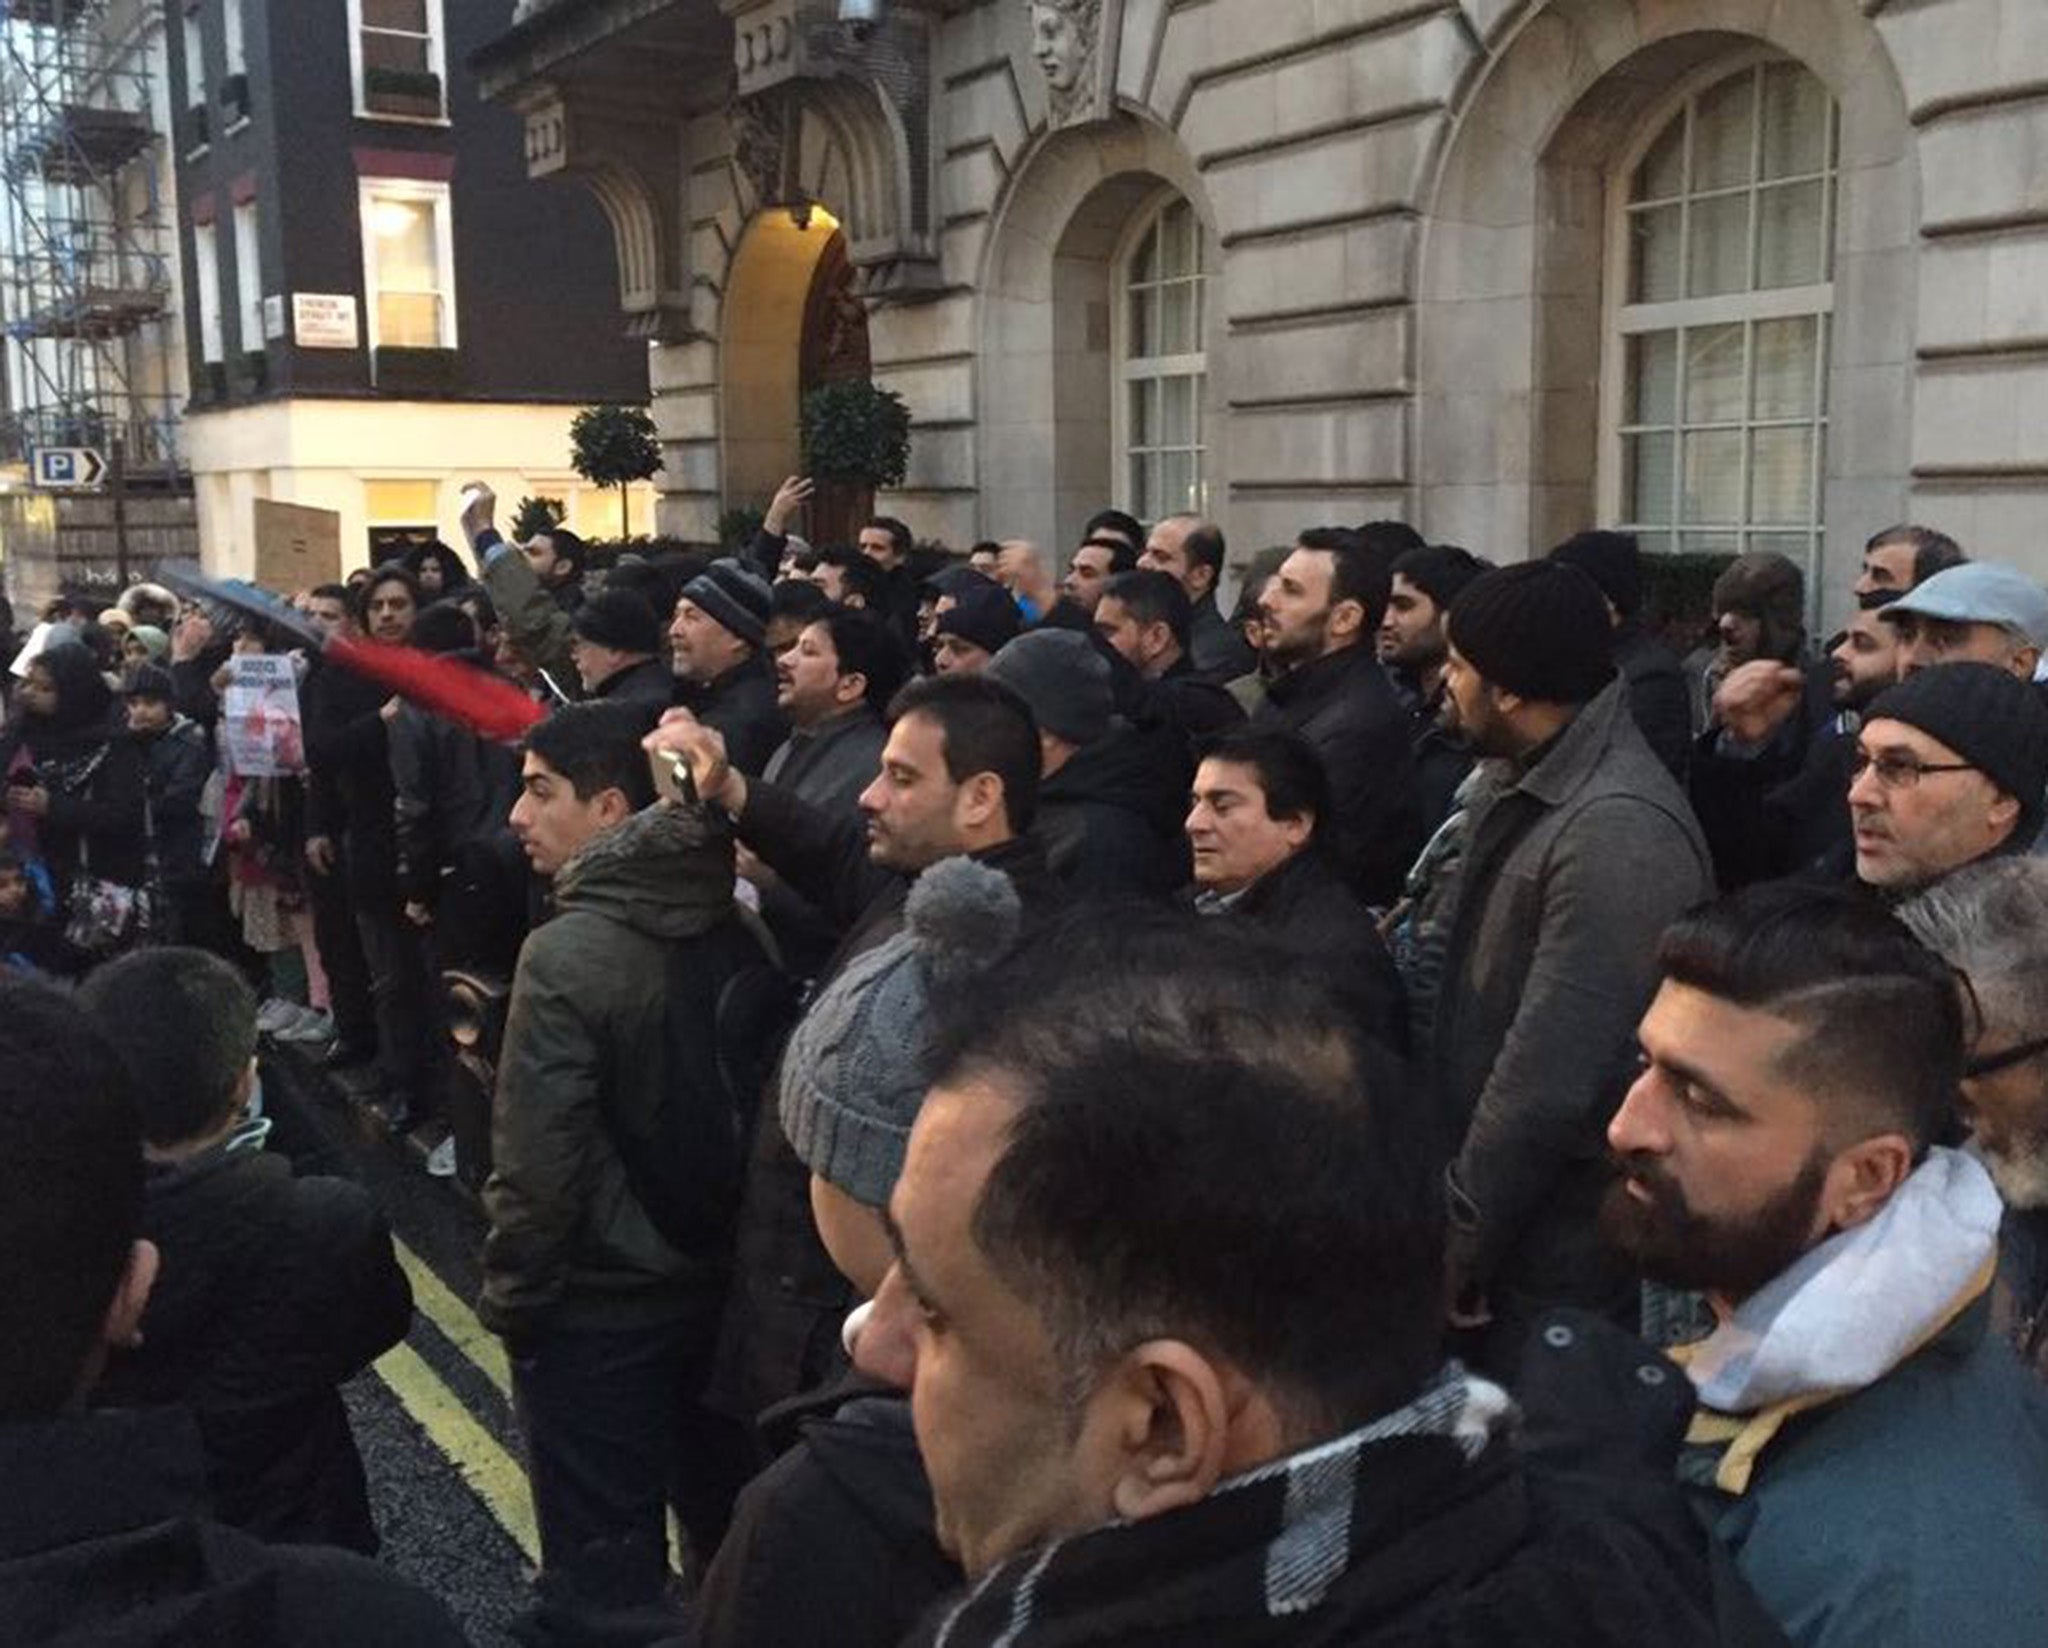 Protesters outside the Saudi embassy in Kensington, London demonstrating against the mass execution of 47 people